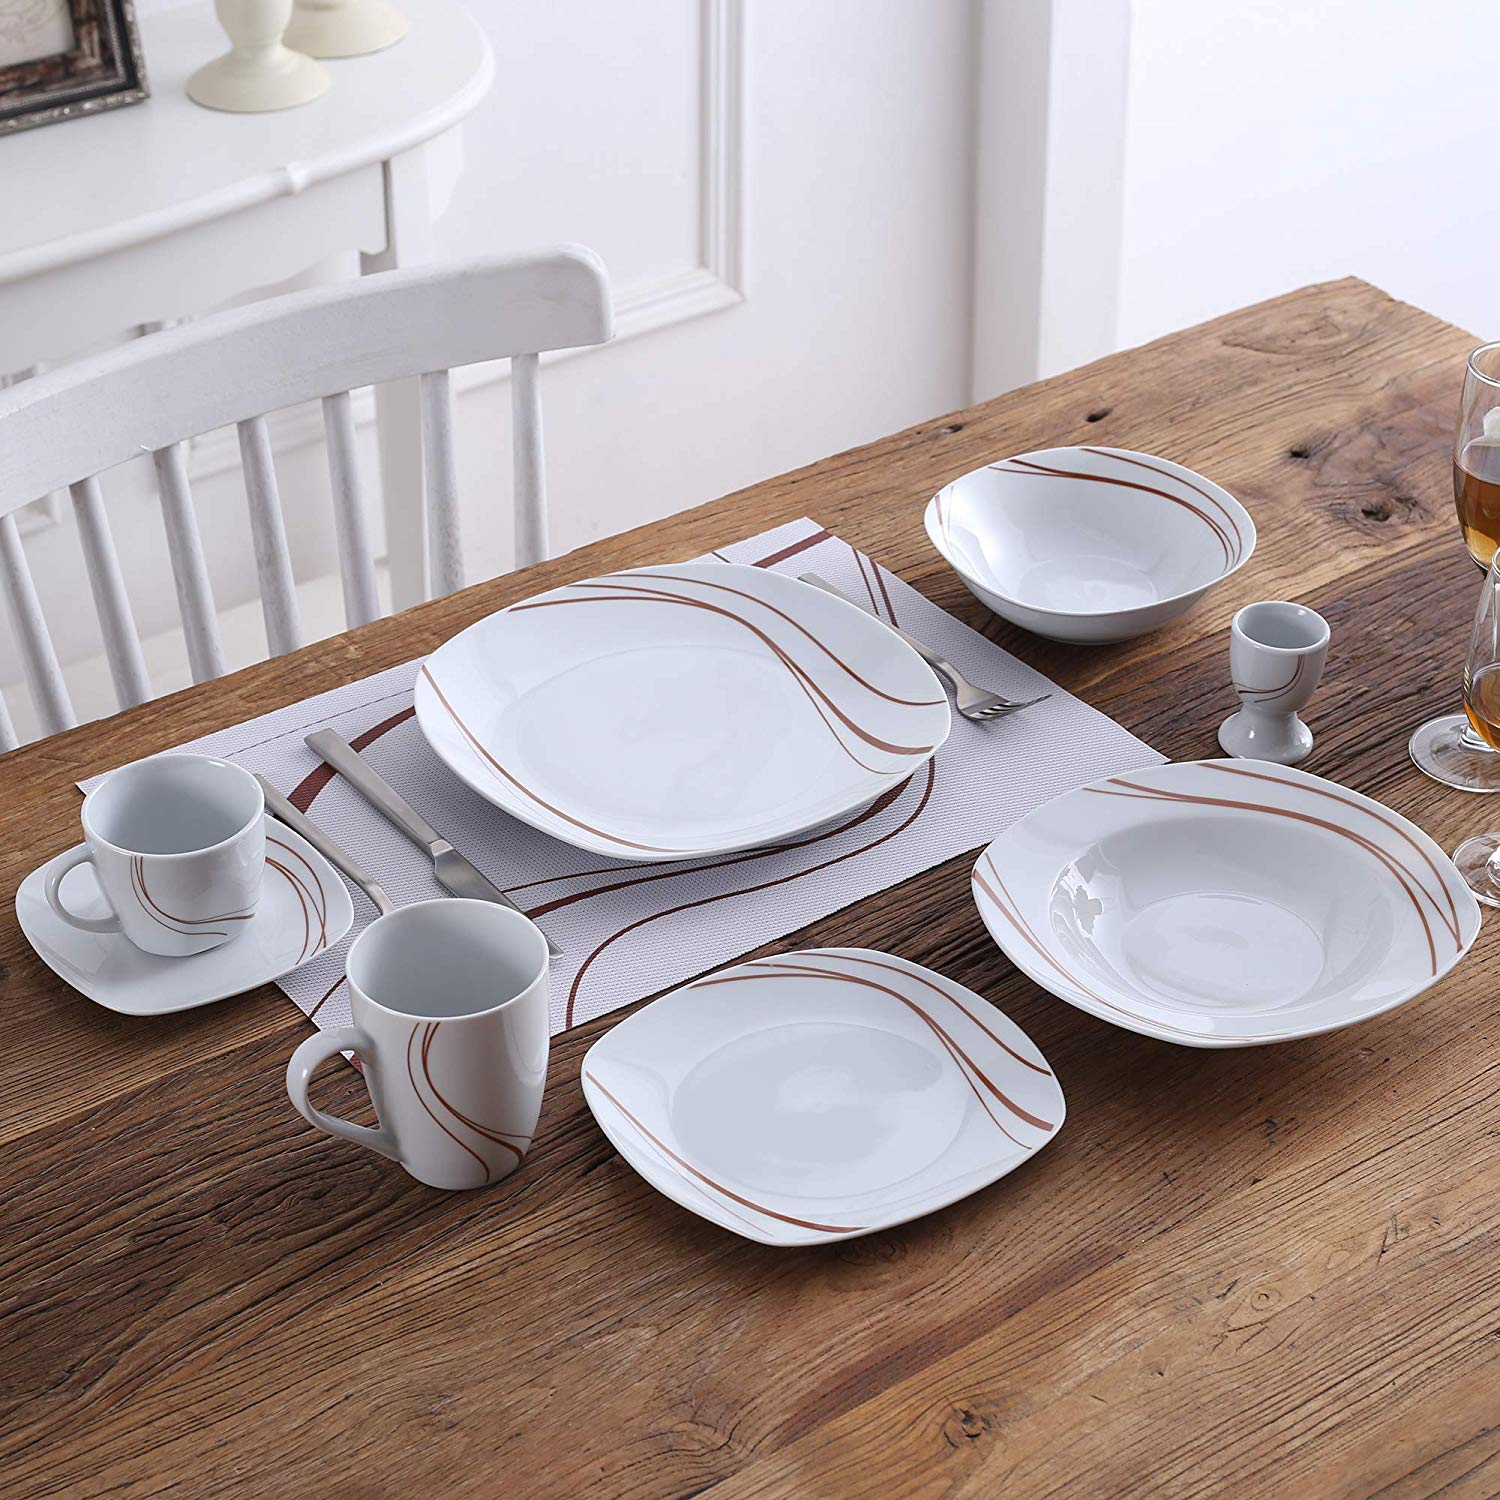 BONNIE 18-Piece Porcelain White Square Dinner Set Tableware Cutlery Plate Set of 6*Dinner Plate,Dessert Plate,Soup Plate - Nordic Side - 18, BONNIE, Cutlery, Dinner, of, Piece, Plate, PlateDe